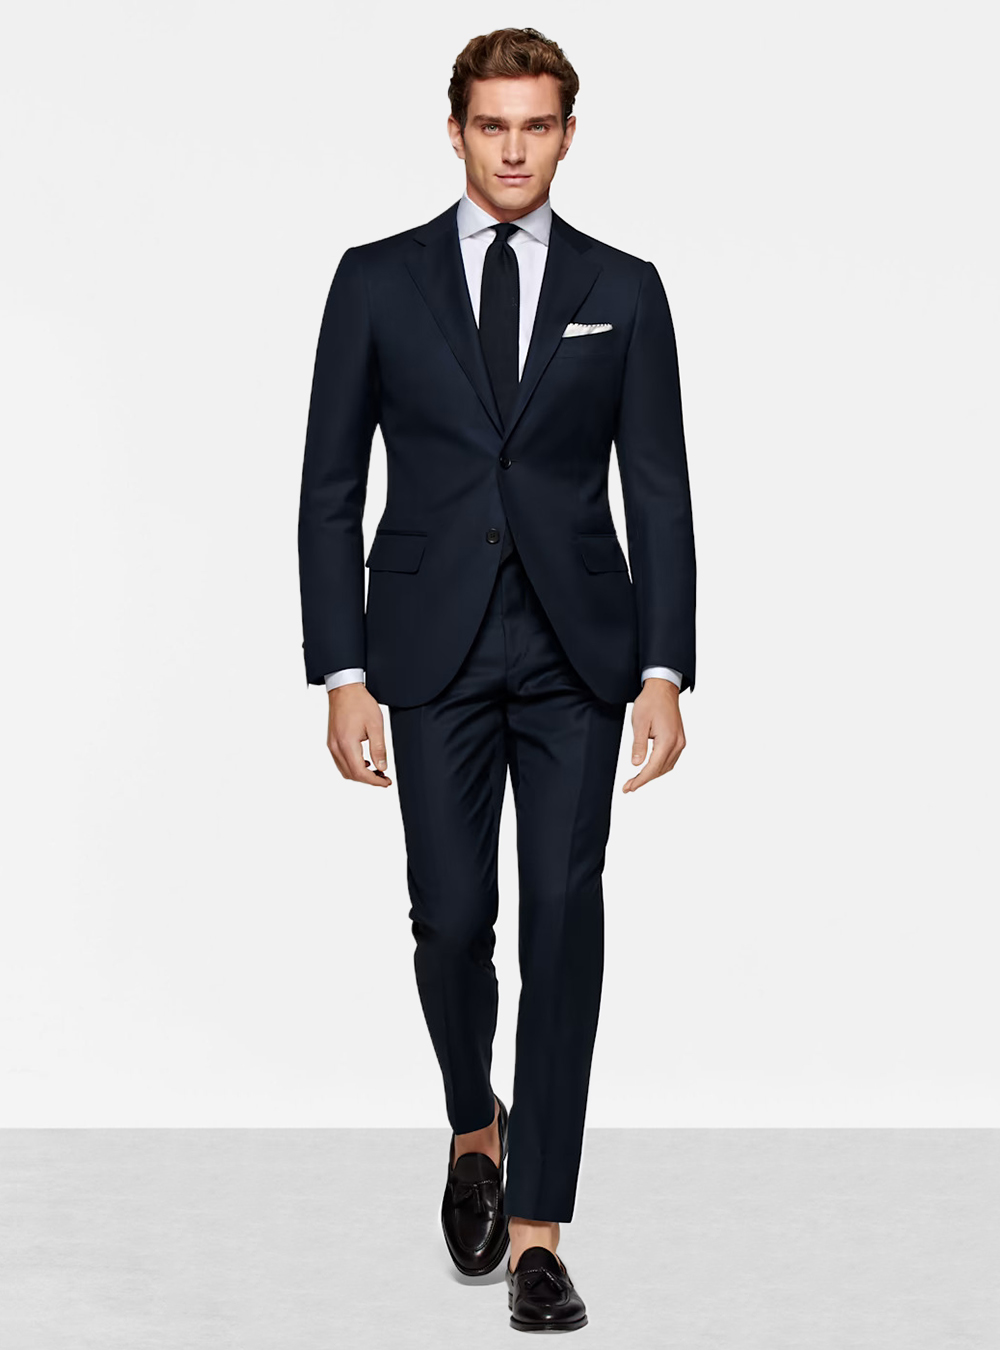 Timeless Blue Suit Combinations And How To Wear It | Bewakoof